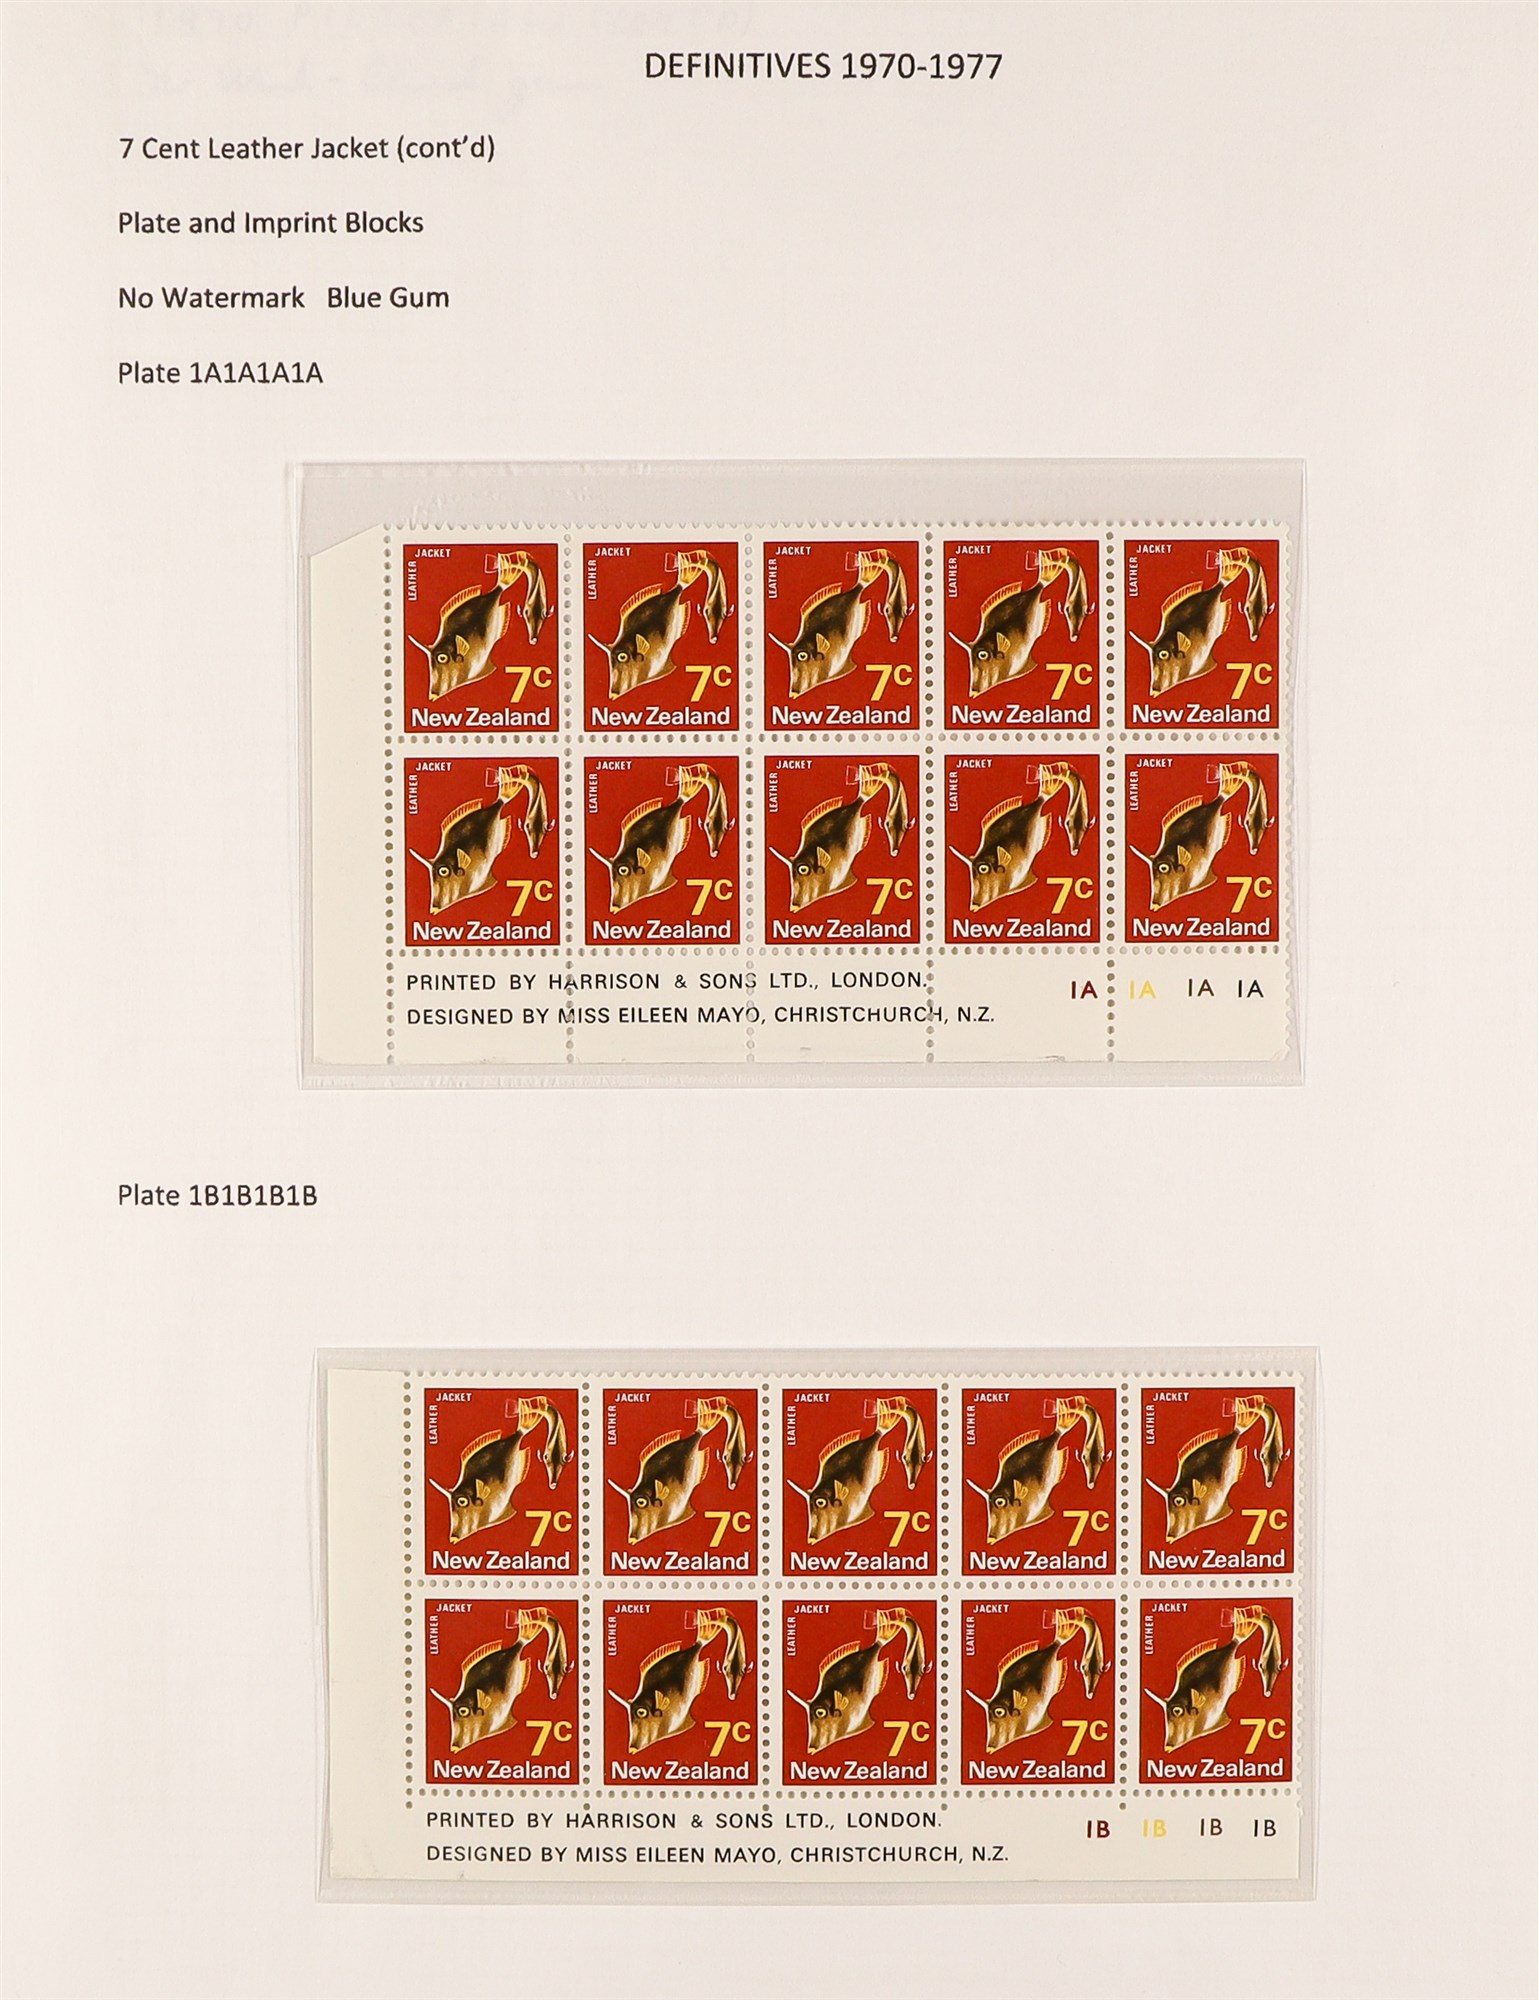 NEW ZEALAND 1970 - 1976 PICTORIALS SPECIALIZED COLLECTION of 110+ never hinged mint plate + - Image 4 of 11